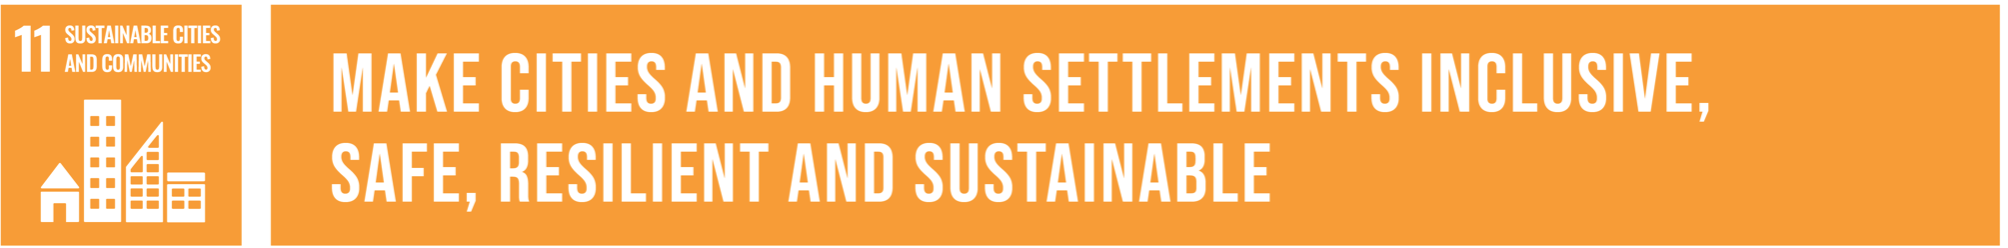 Sustainability Goal 11: Sustainable cities and communities